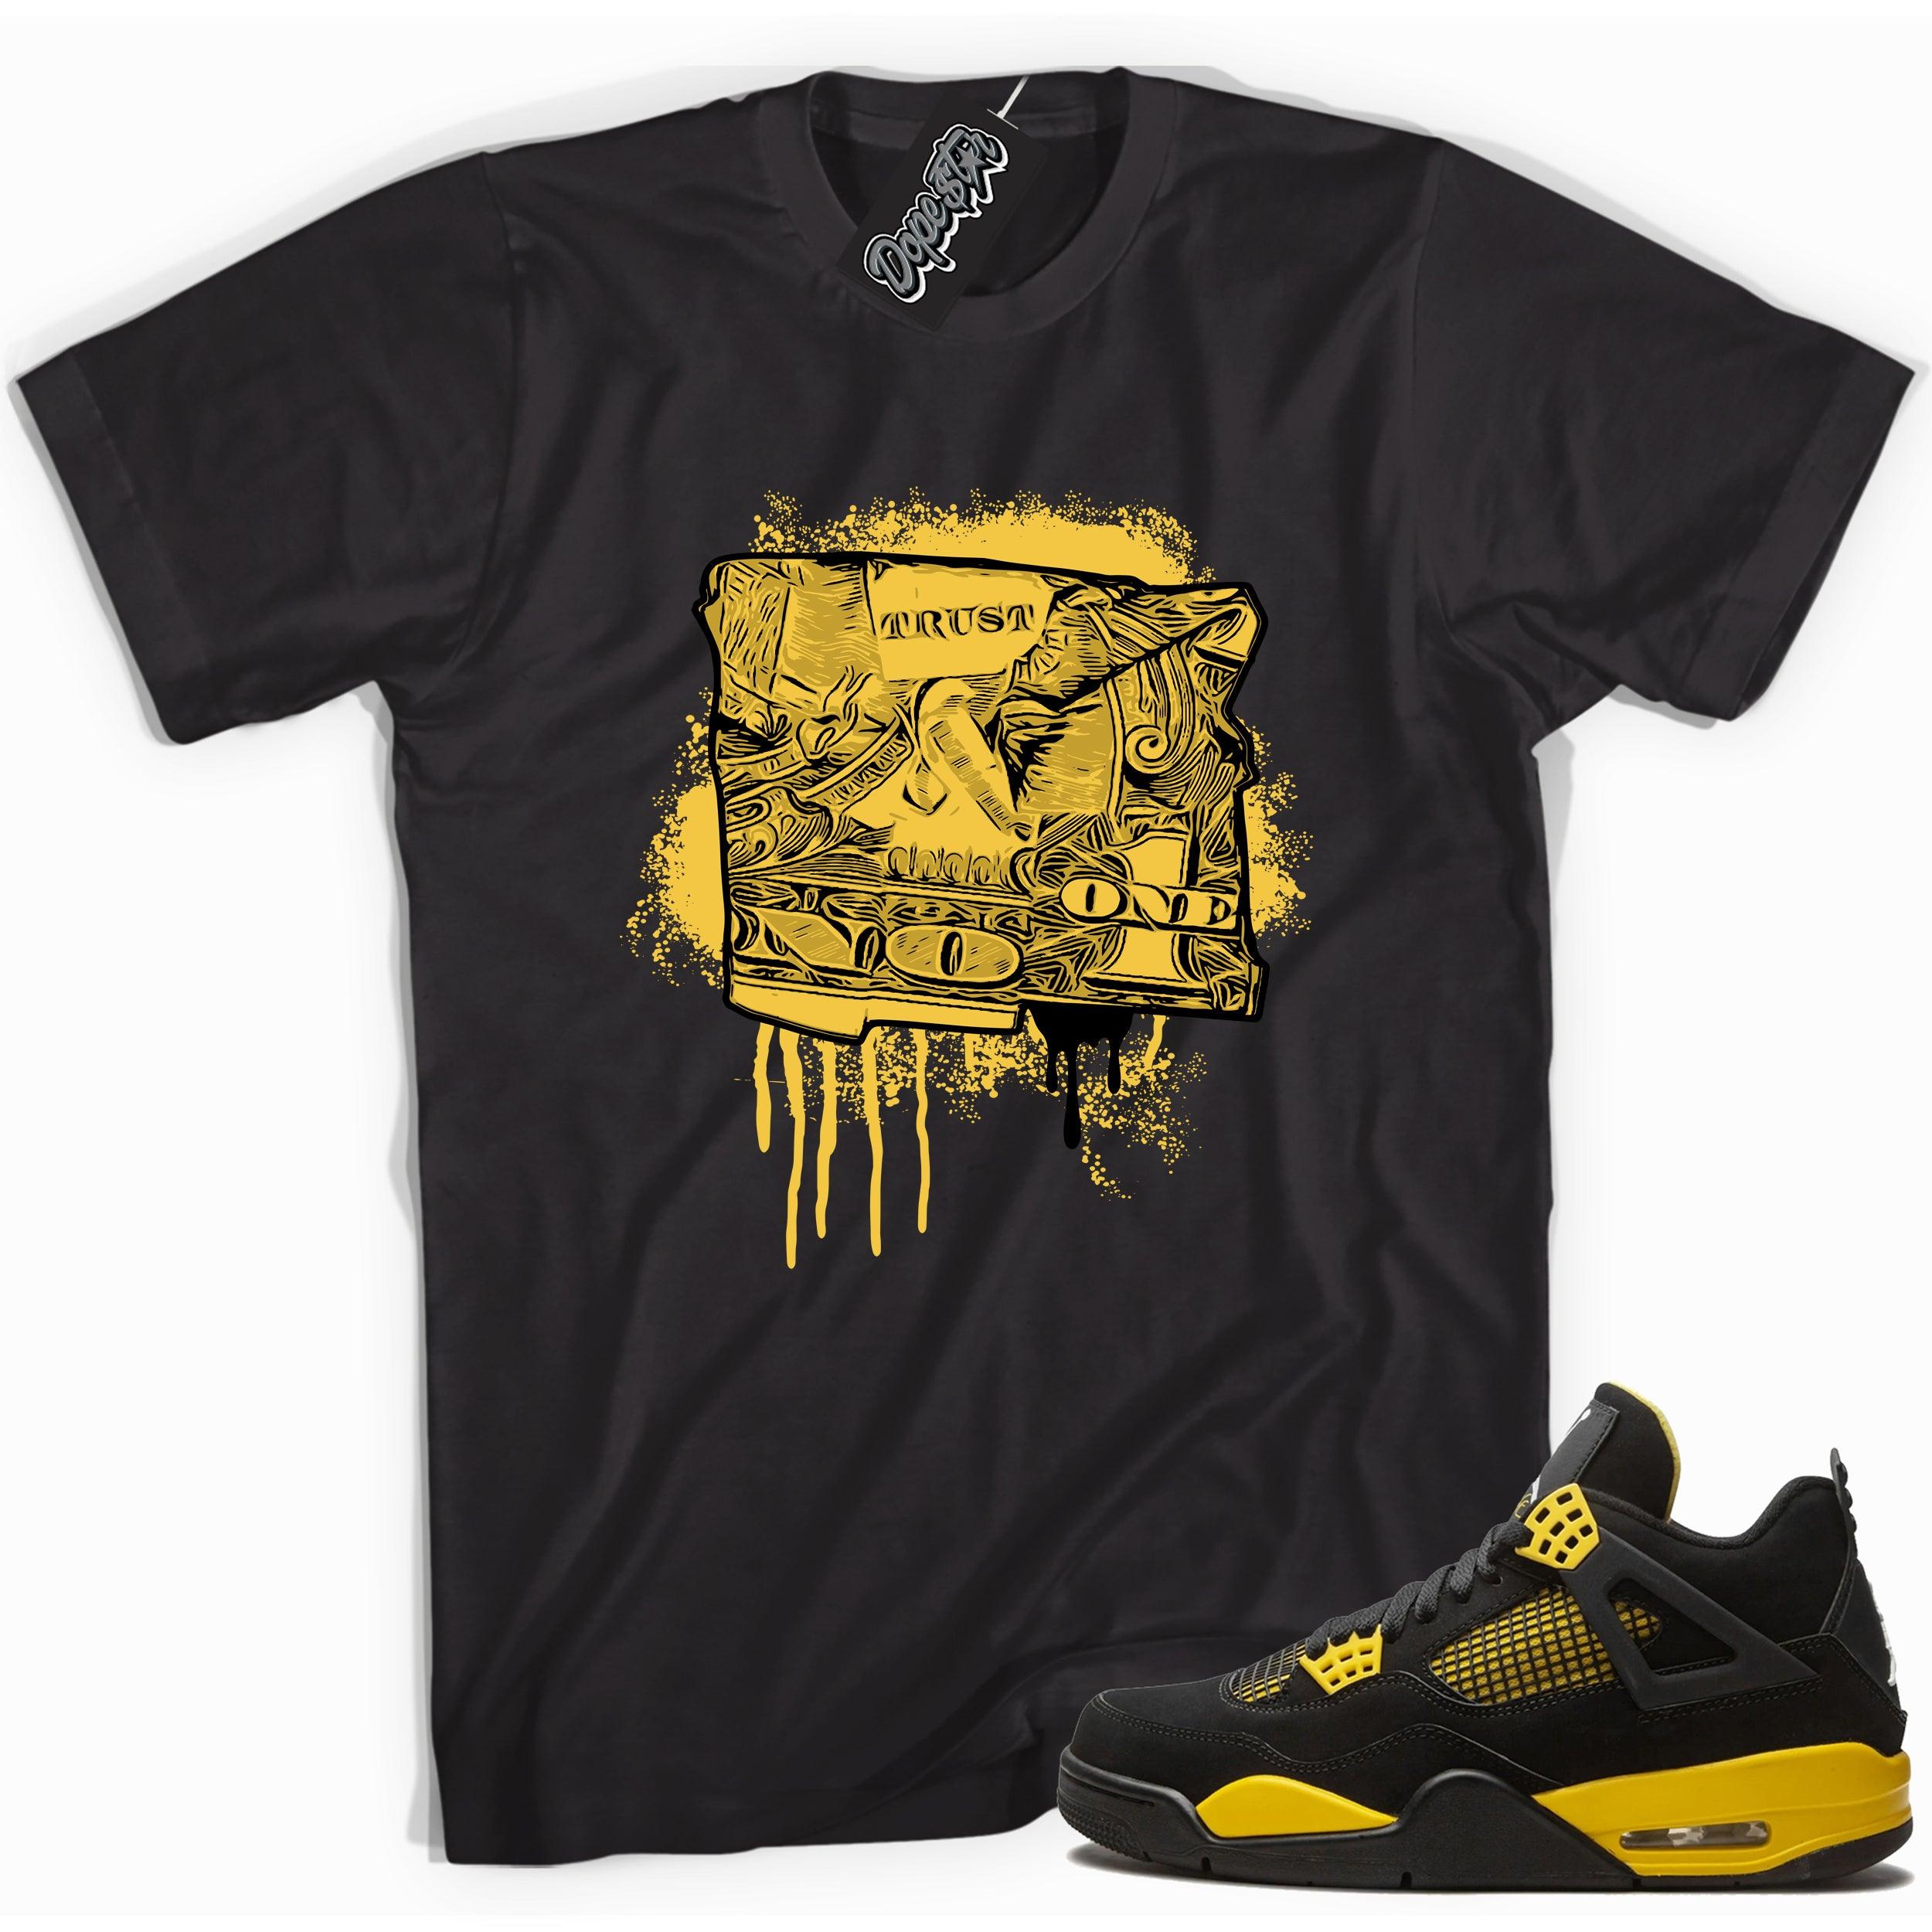 Cool black graphic tee with 'tru$t no one dollar' print, that perfectly matches  Air Jordan 4 Thunder sneakers